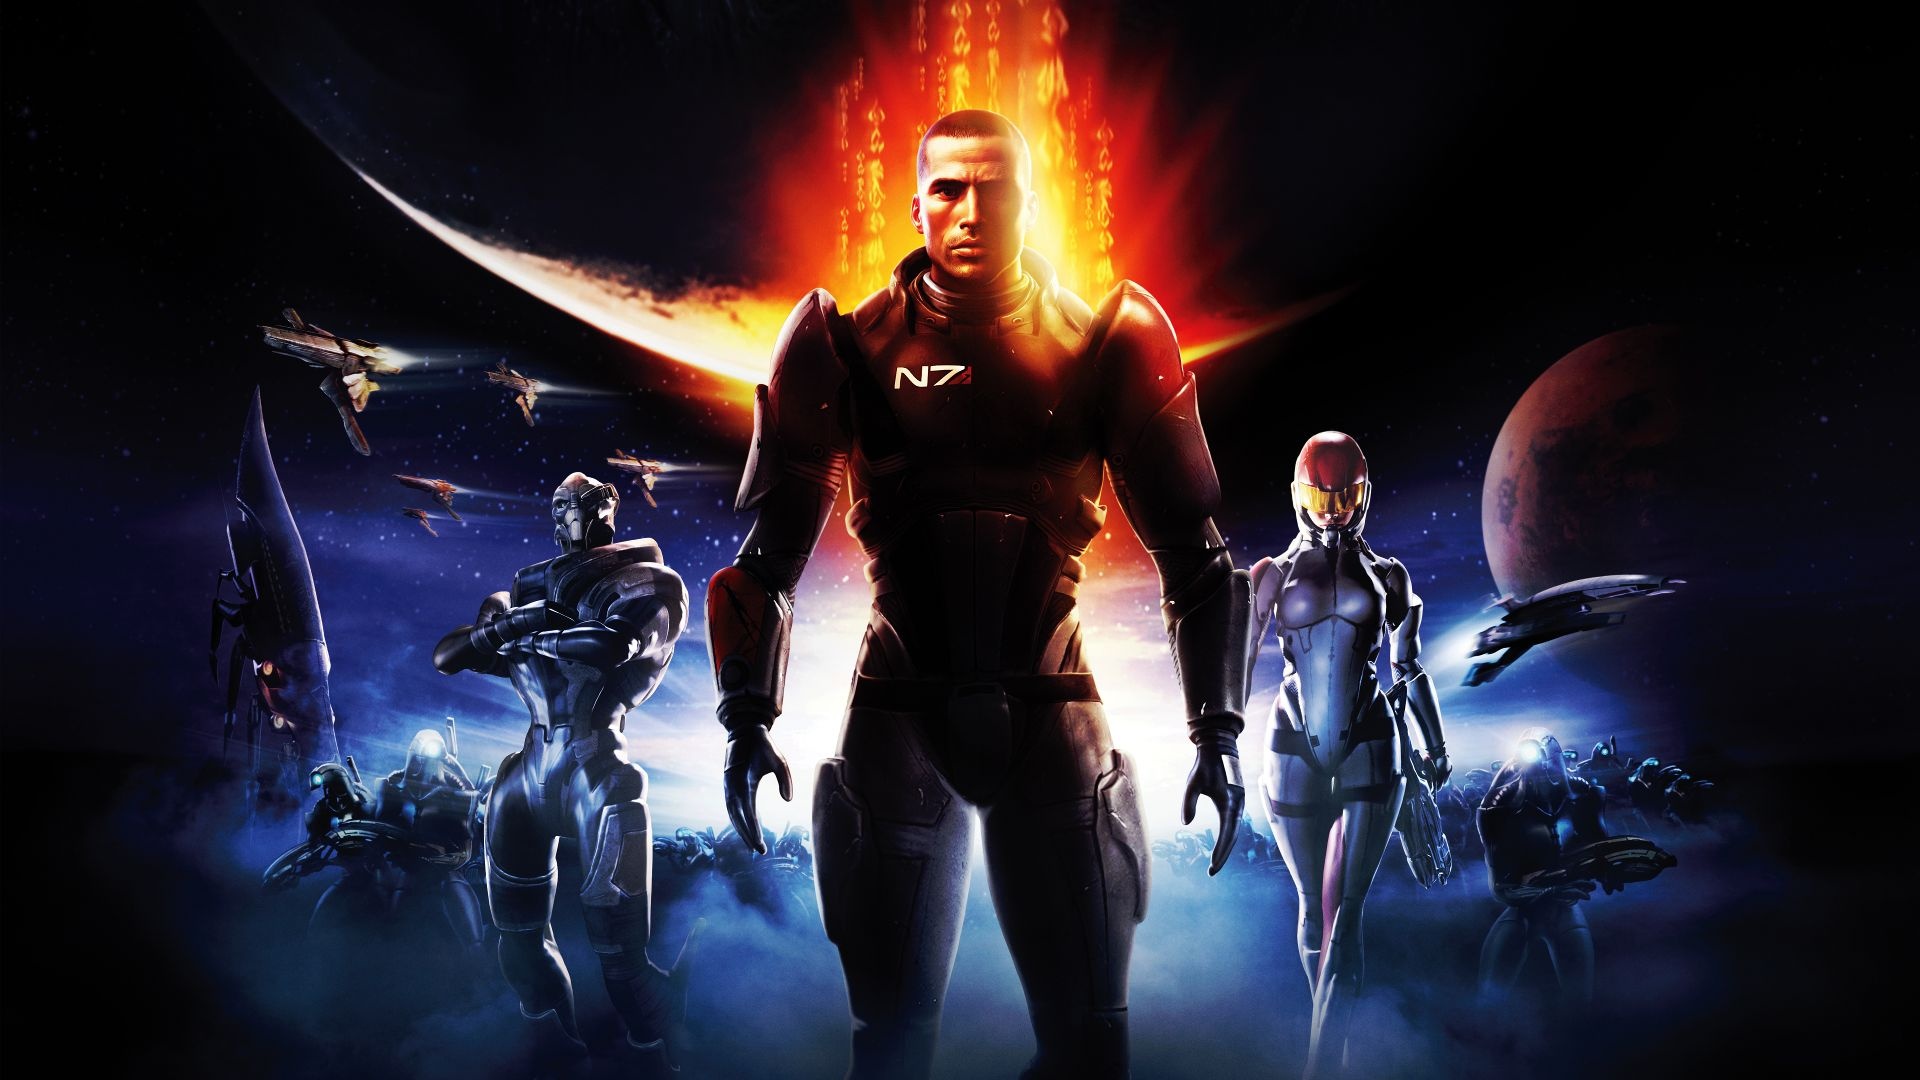 Mass Effect, Epic gaming series, Prime Day freebies, Unforgettable gaming experience, 1920x1080 Full HD Desktop